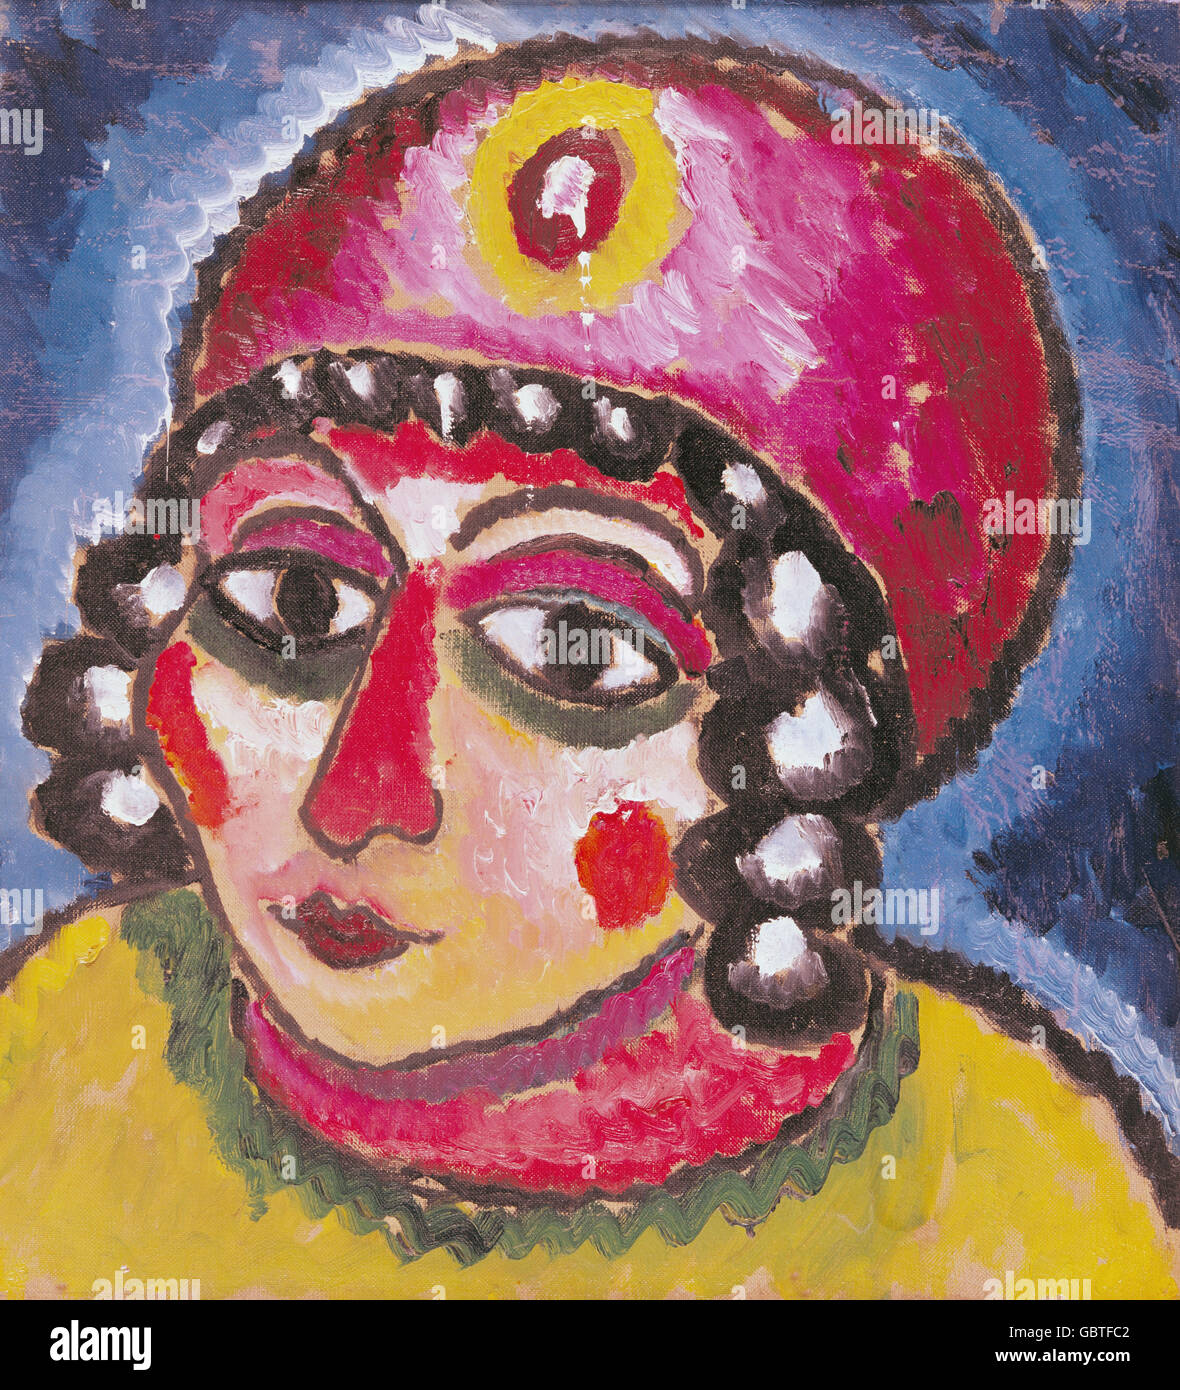 fine arts, Jawlensky, Alexej von, (1864 - 1941), painting, 'head of girl with red turban', Karl Ernst Osthaus museum, Stock Photo